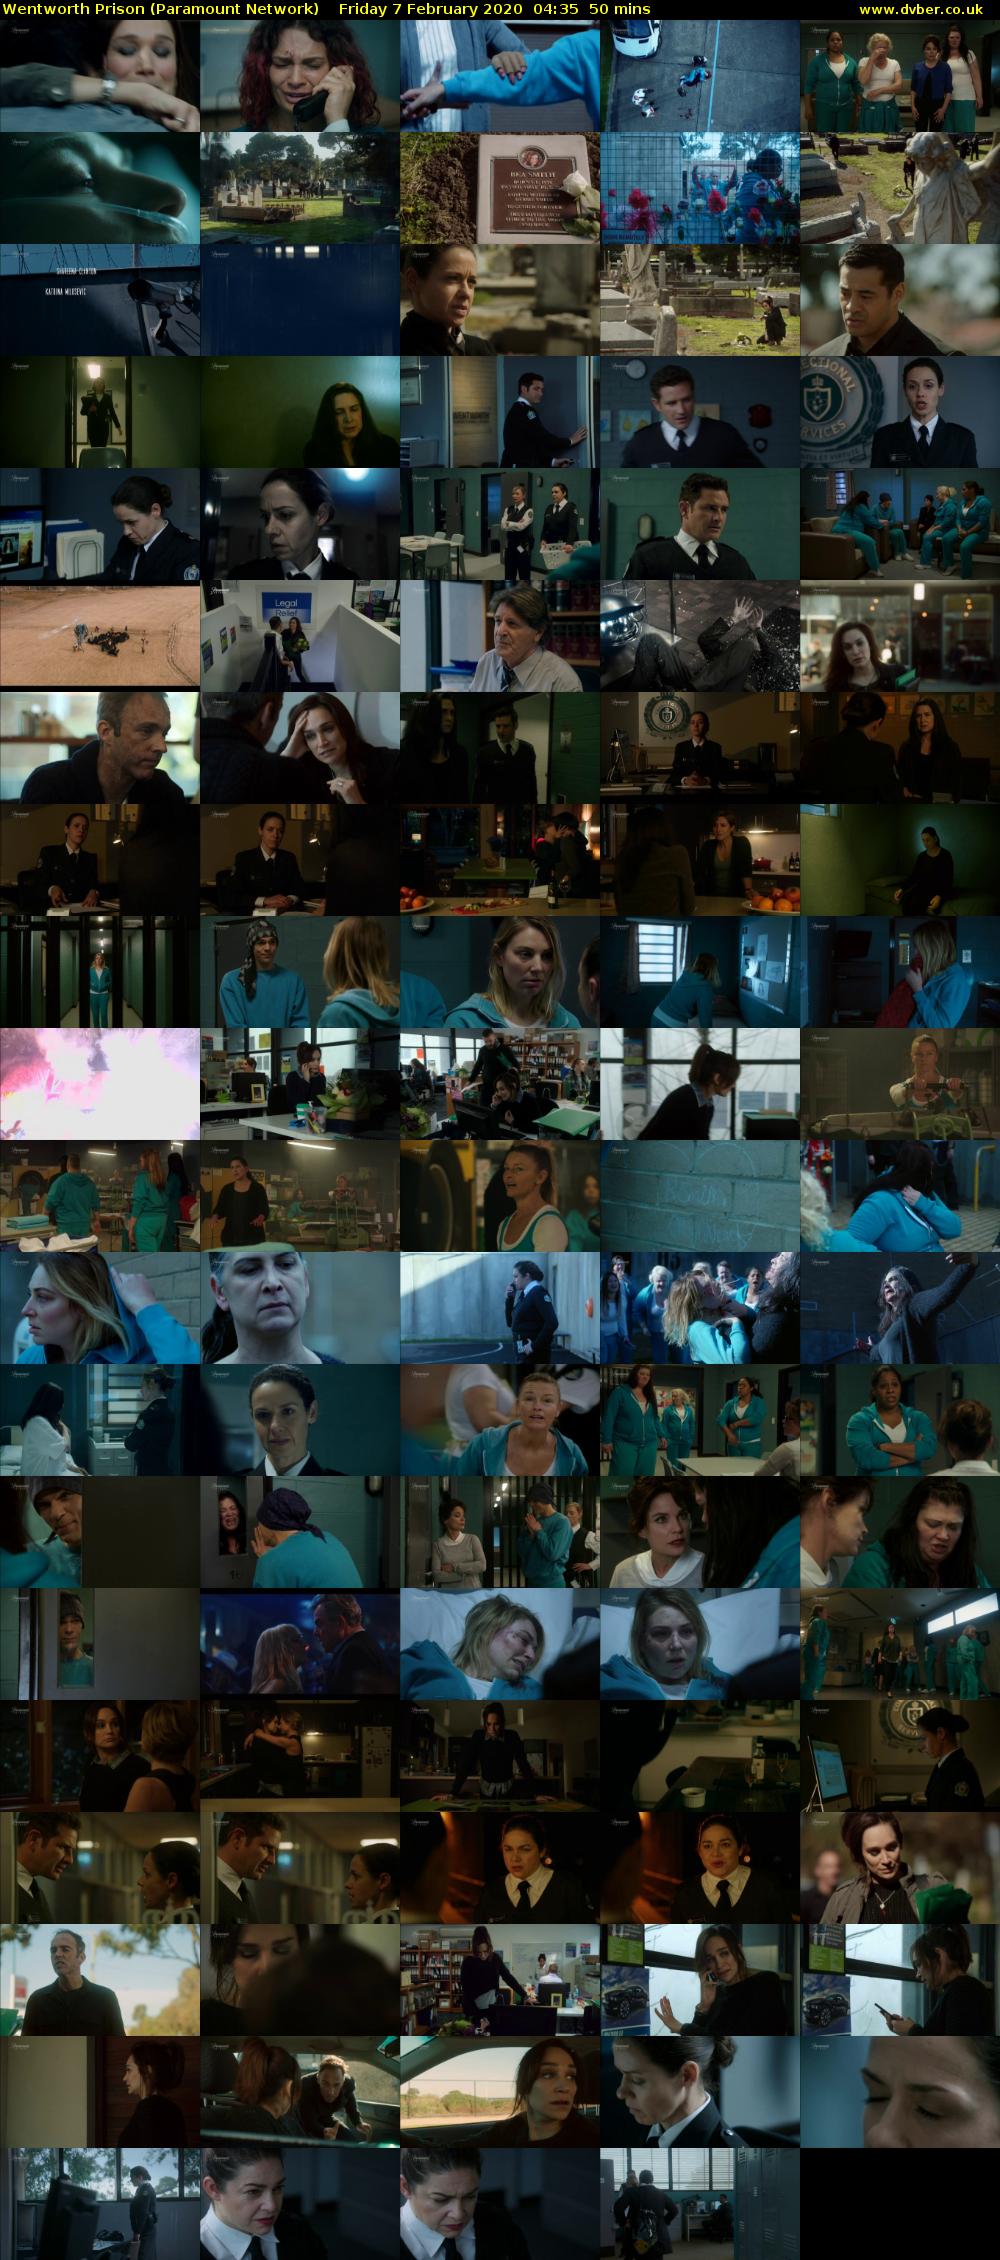 Wentworth Prison (Paramount Network) Friday 7 February 2020 04:35 - 05:25